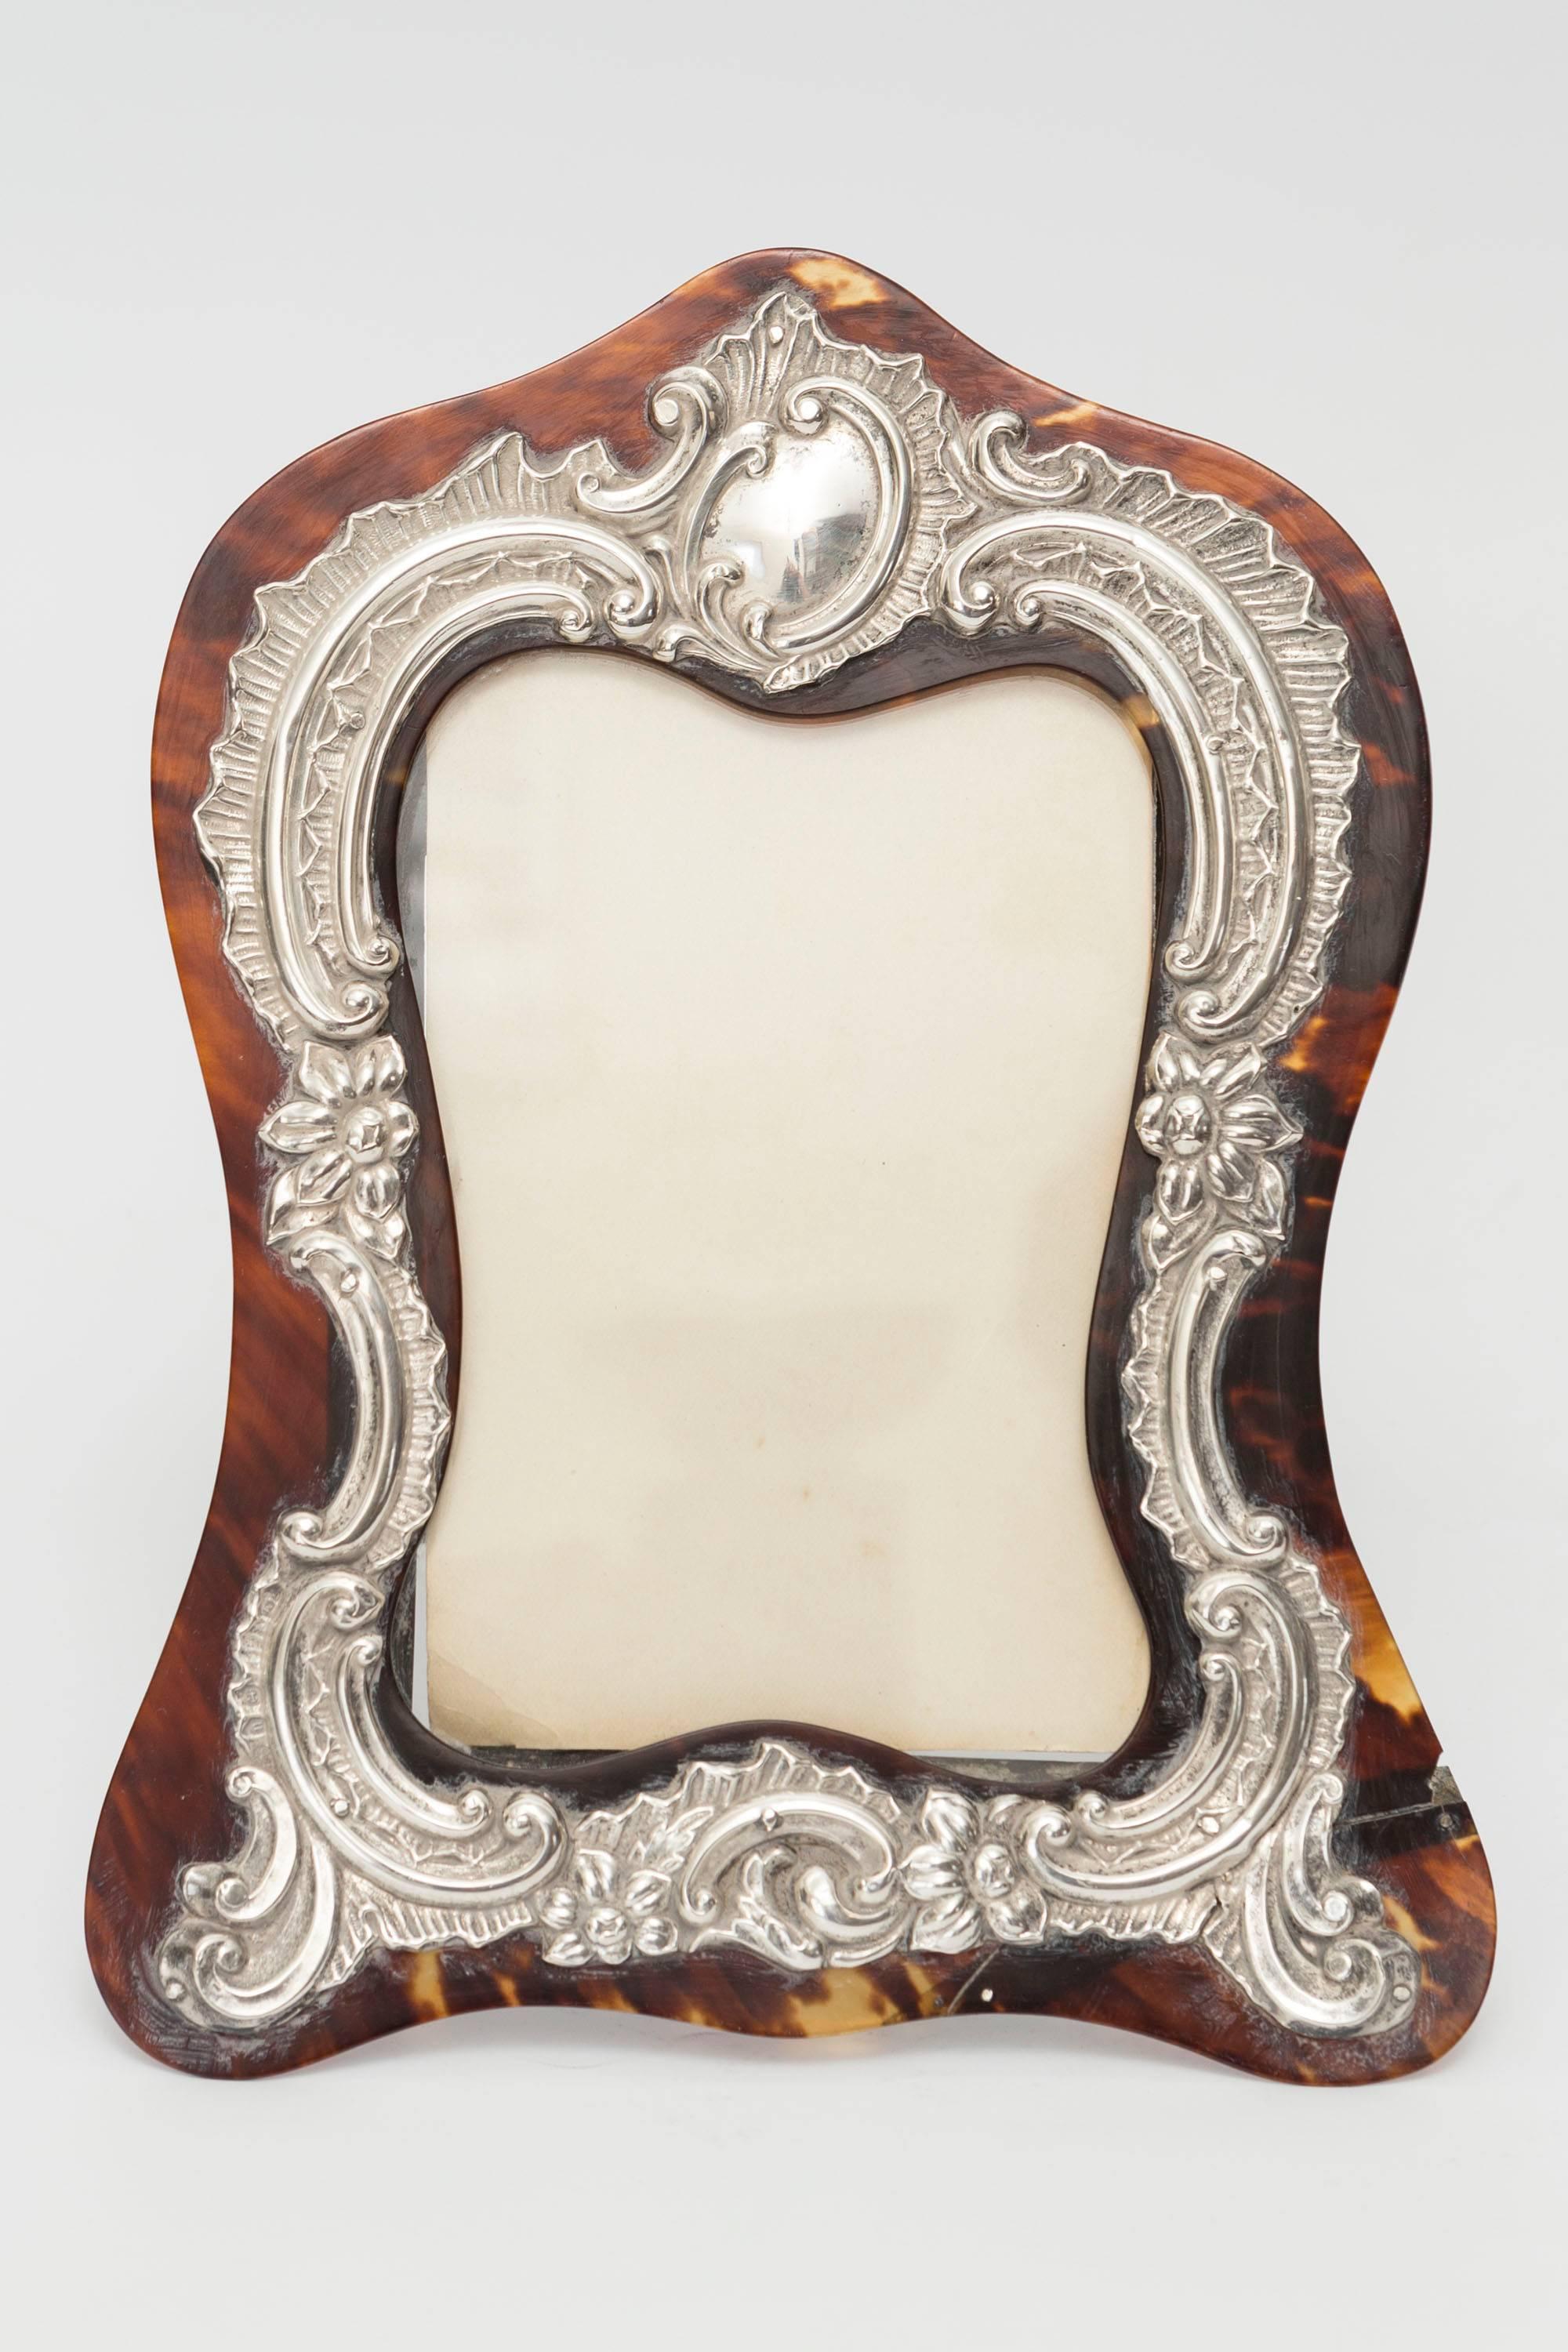 19th Century Ornate silver mounts on tortoiseshell picture frame. Fits photo size 3.5 x 5.5.